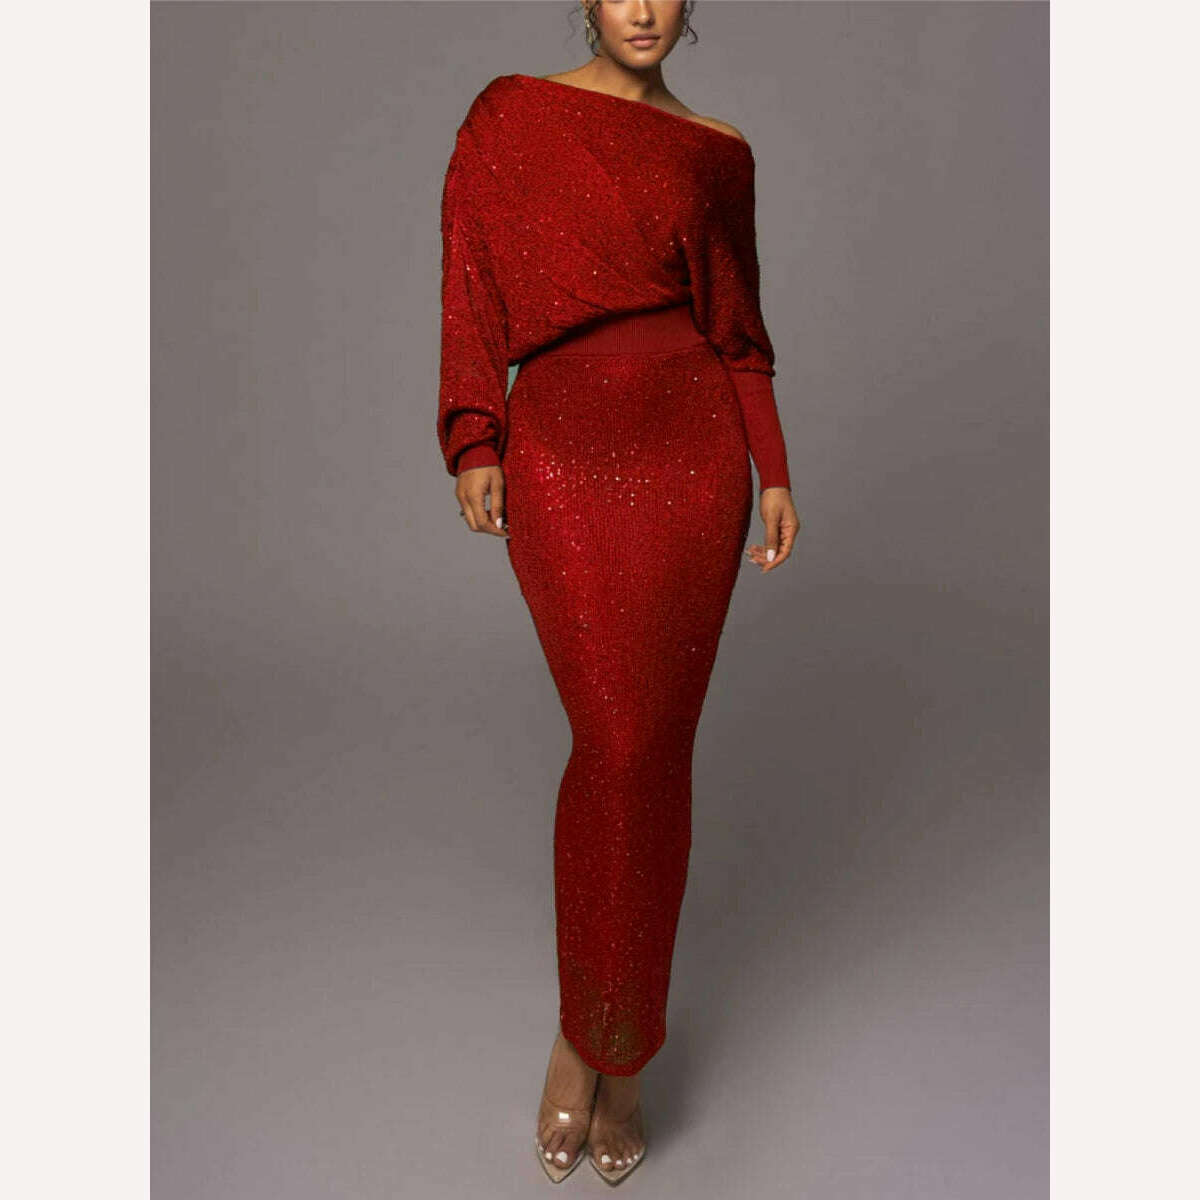 KIMLUD, Mikydely Autumn New Elegant Off The Shoulder Knitted  Dress Woman Long sleeve Festive Dress, red / S, KIMLUD Women's Clothes